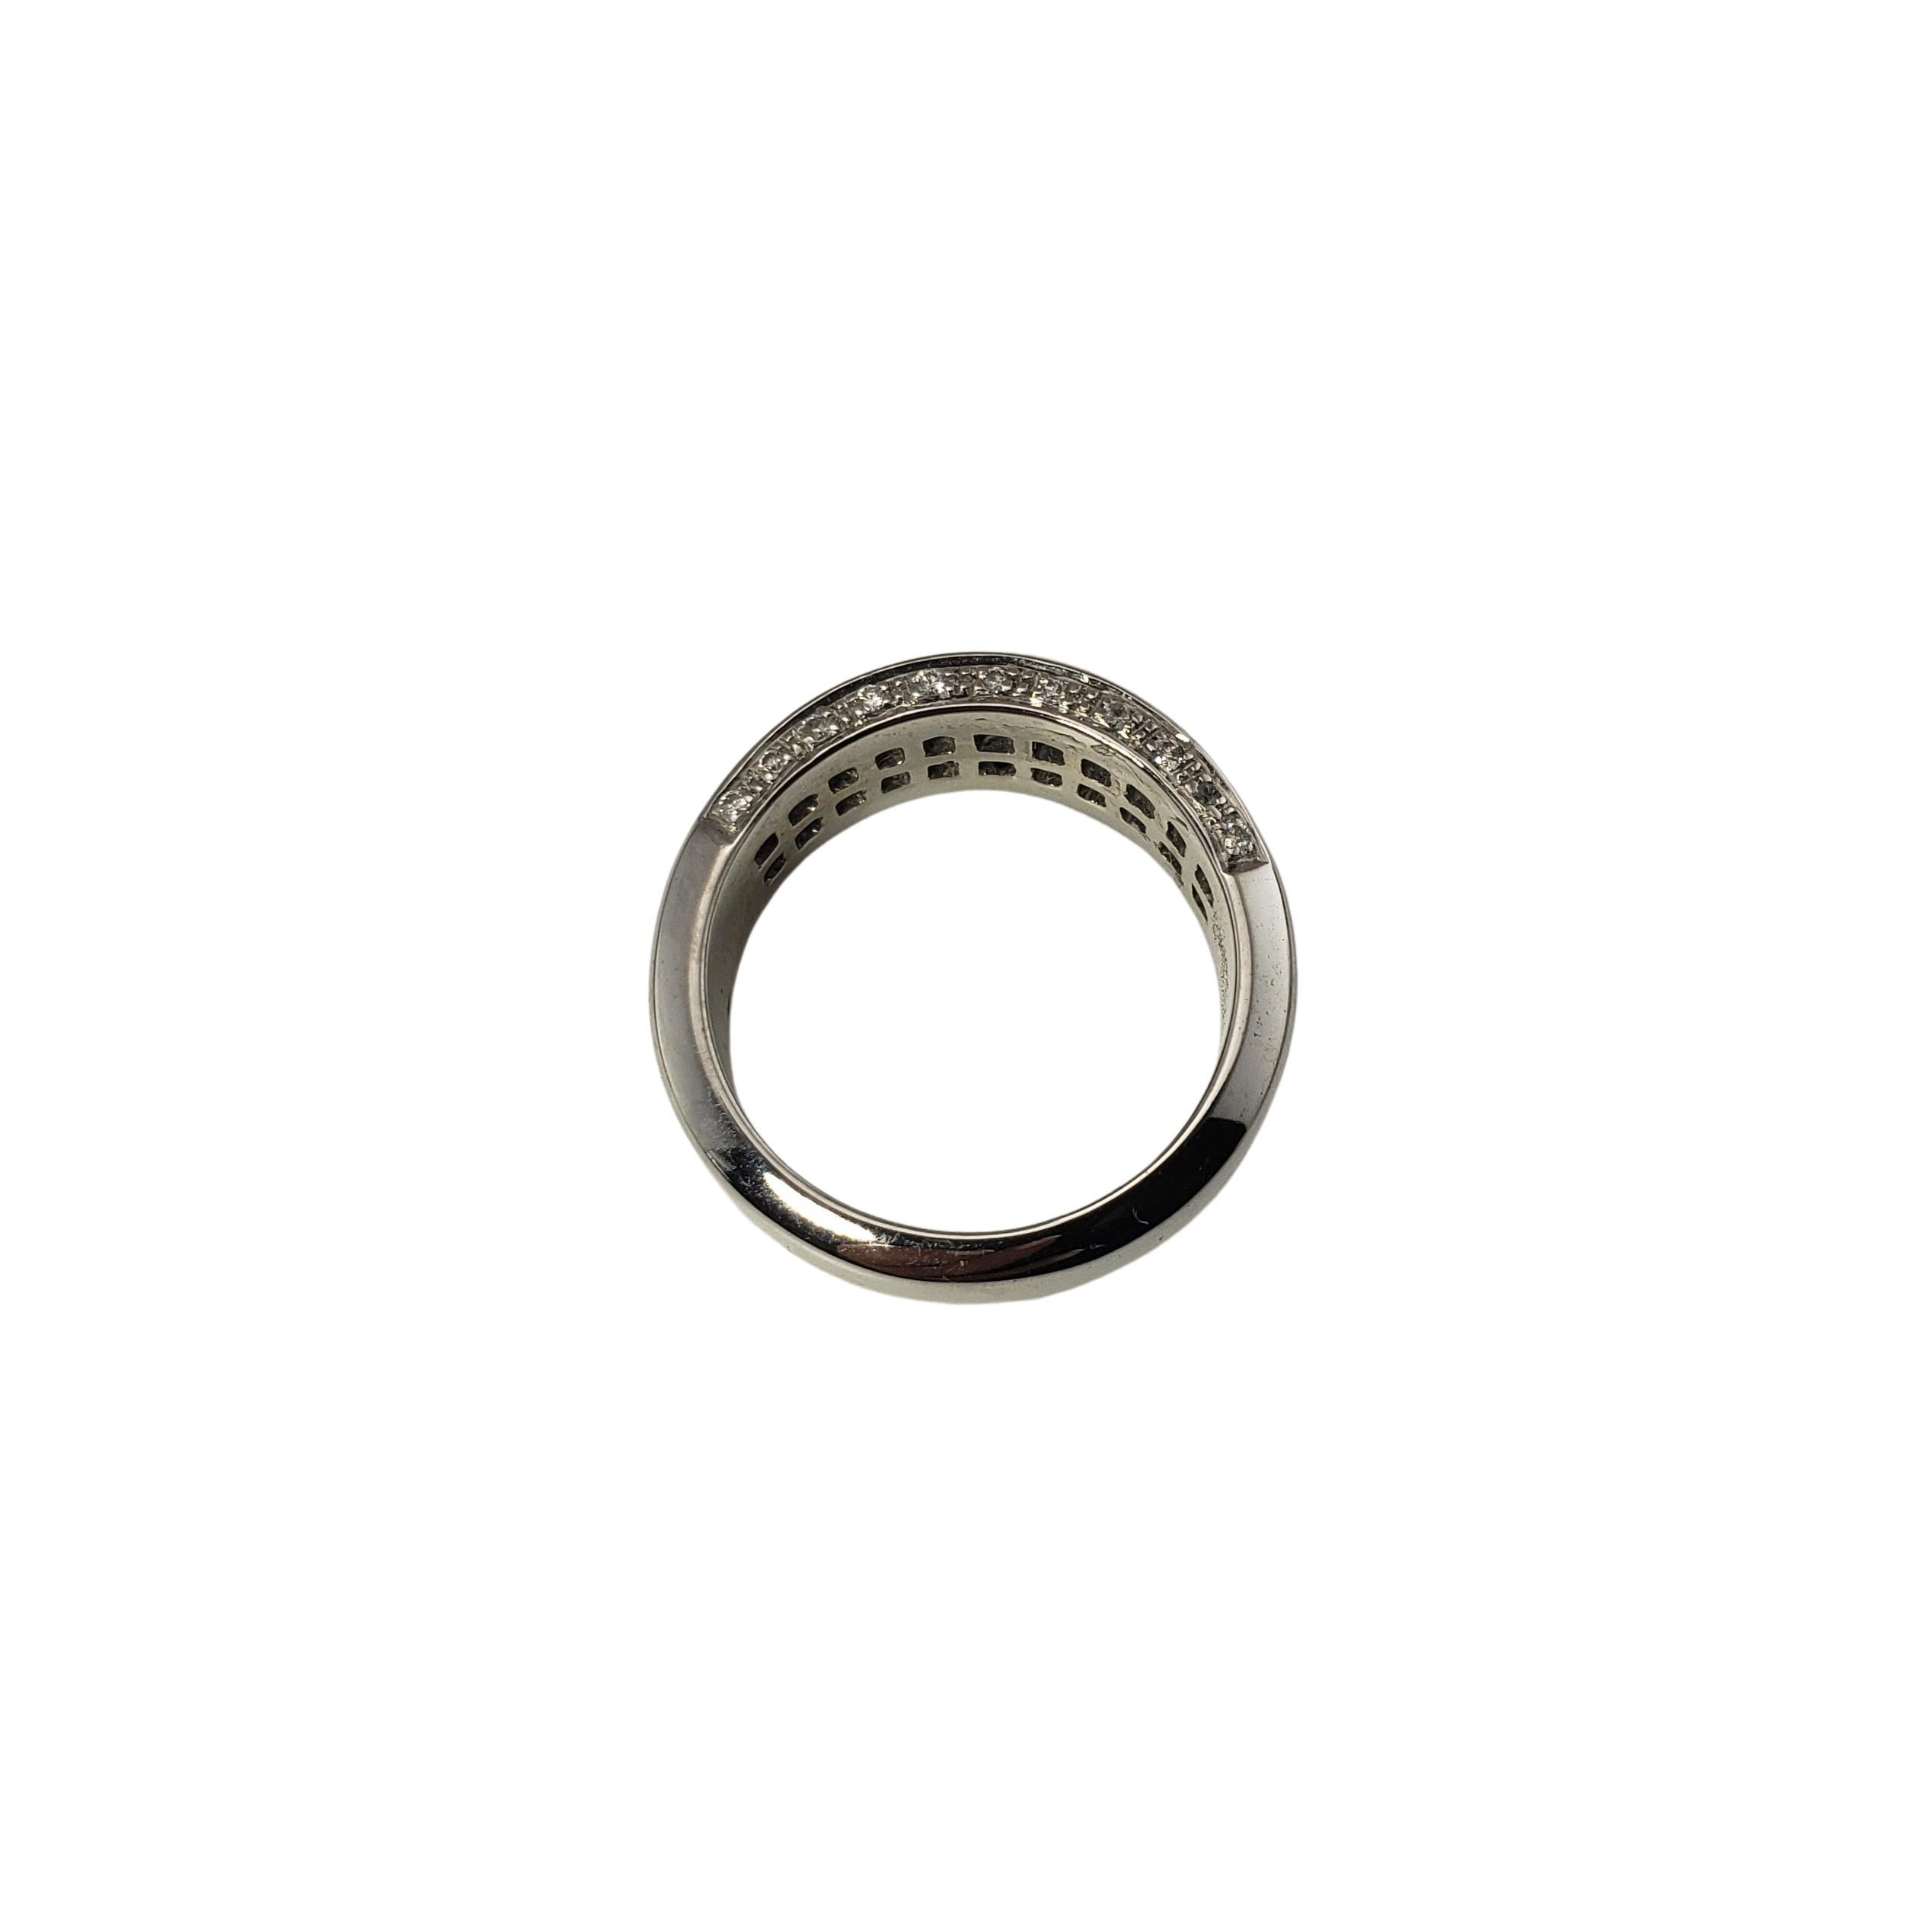 6 ring size